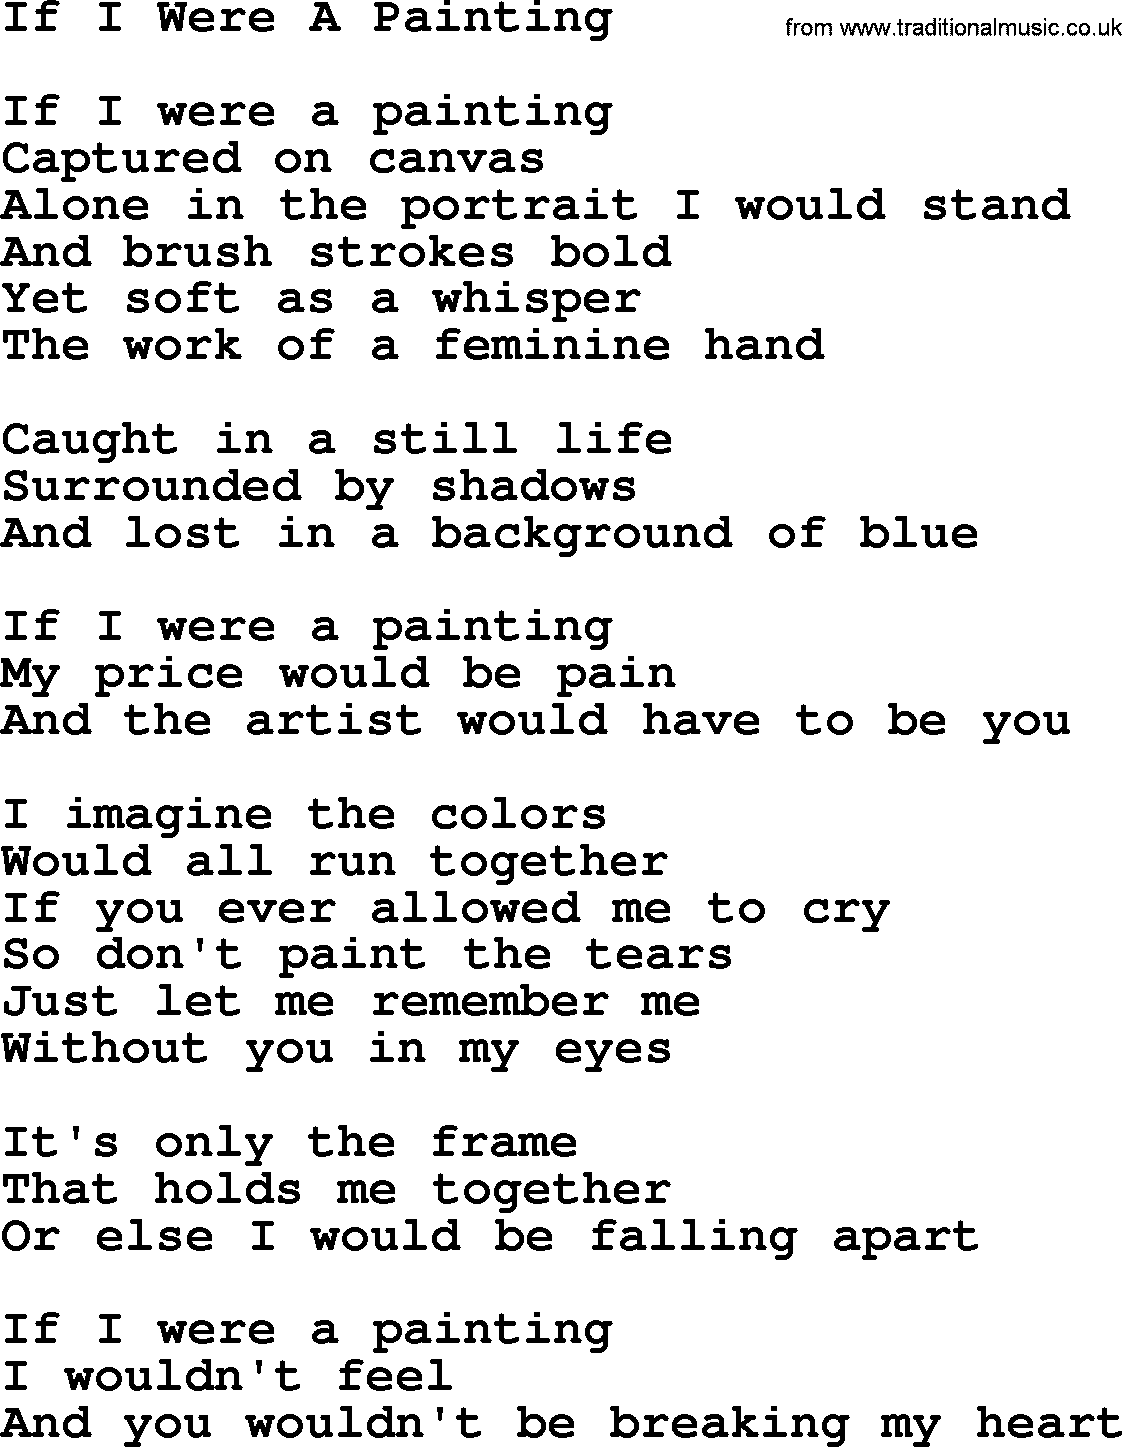 Willie Nelson song: If I Were A Painting lyrics